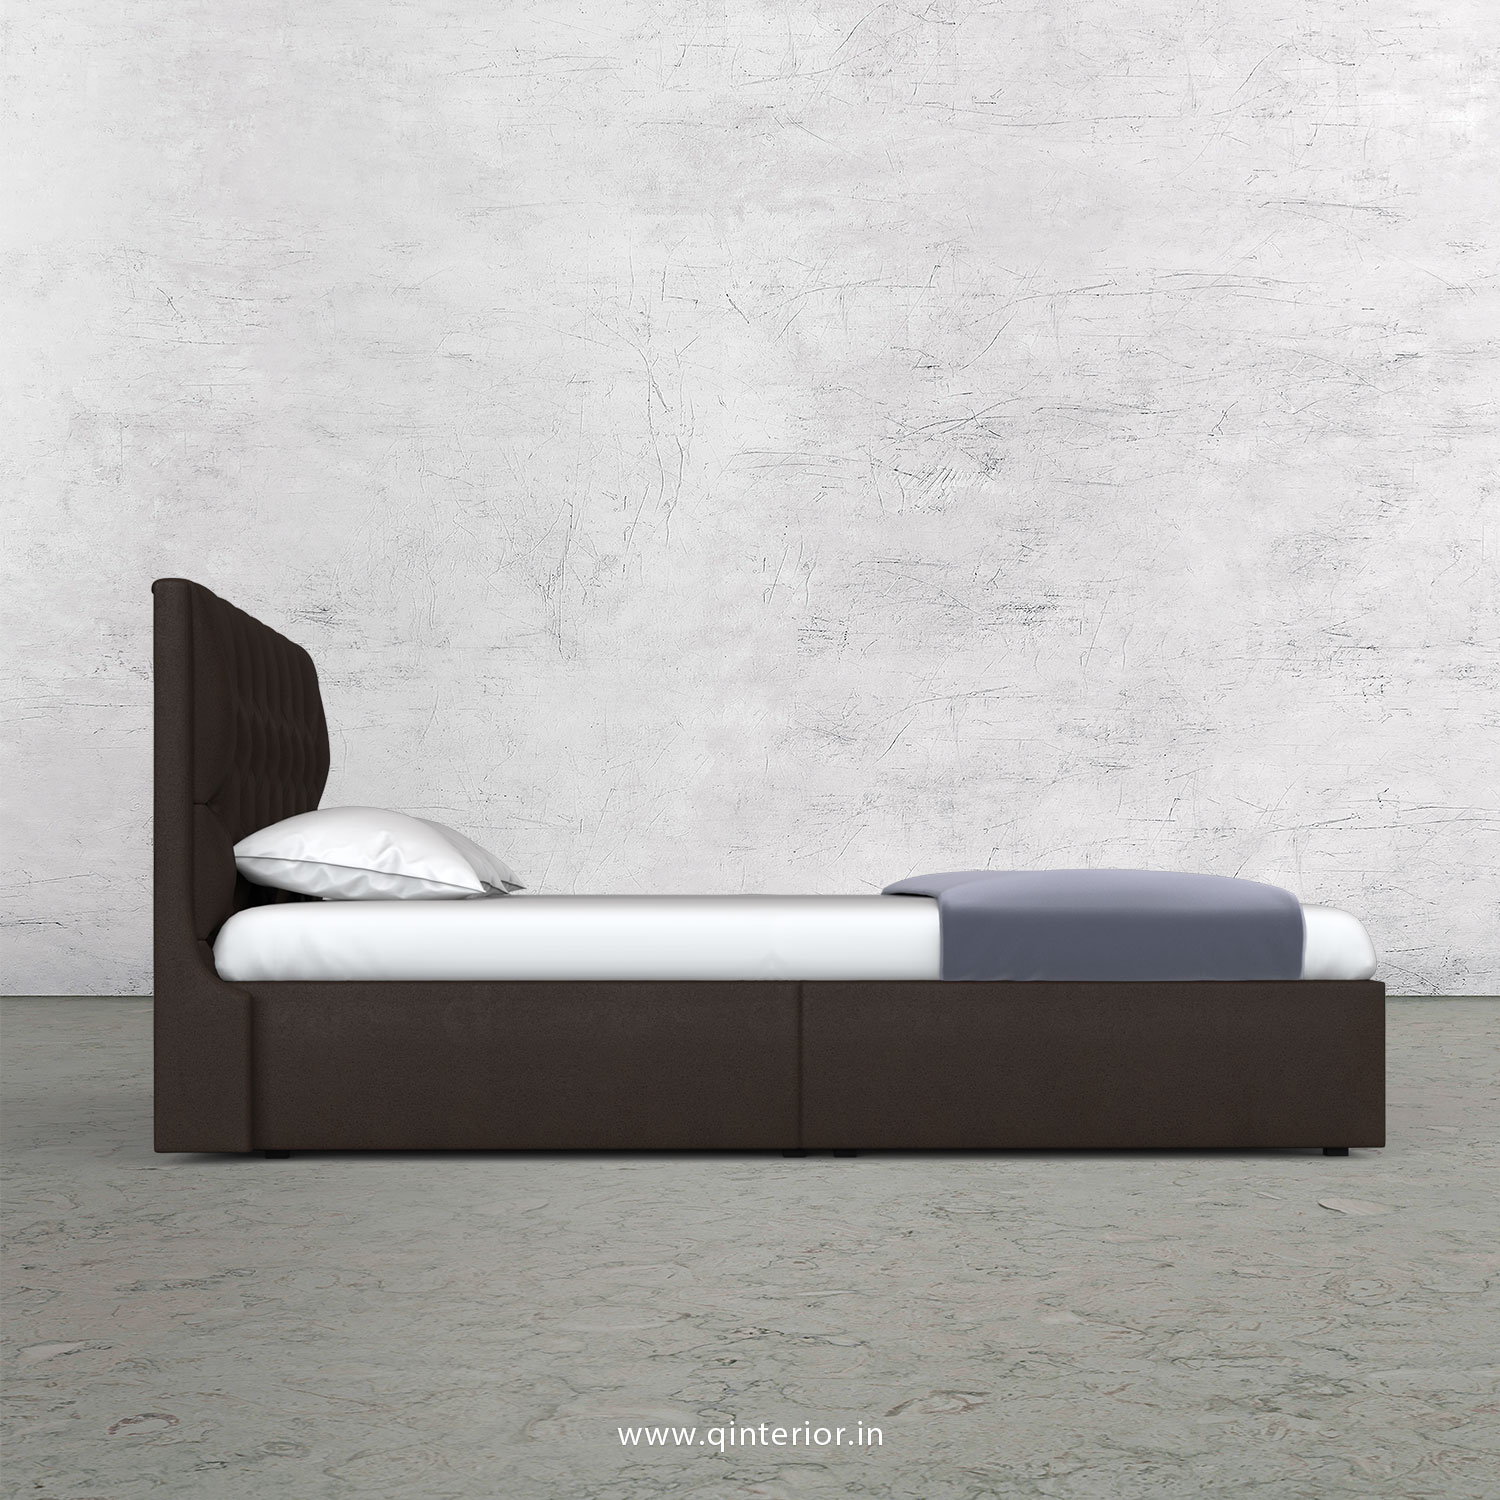 Scorpius King Size Storage Bed in Fab Leather Fabric - KBD001 FL16